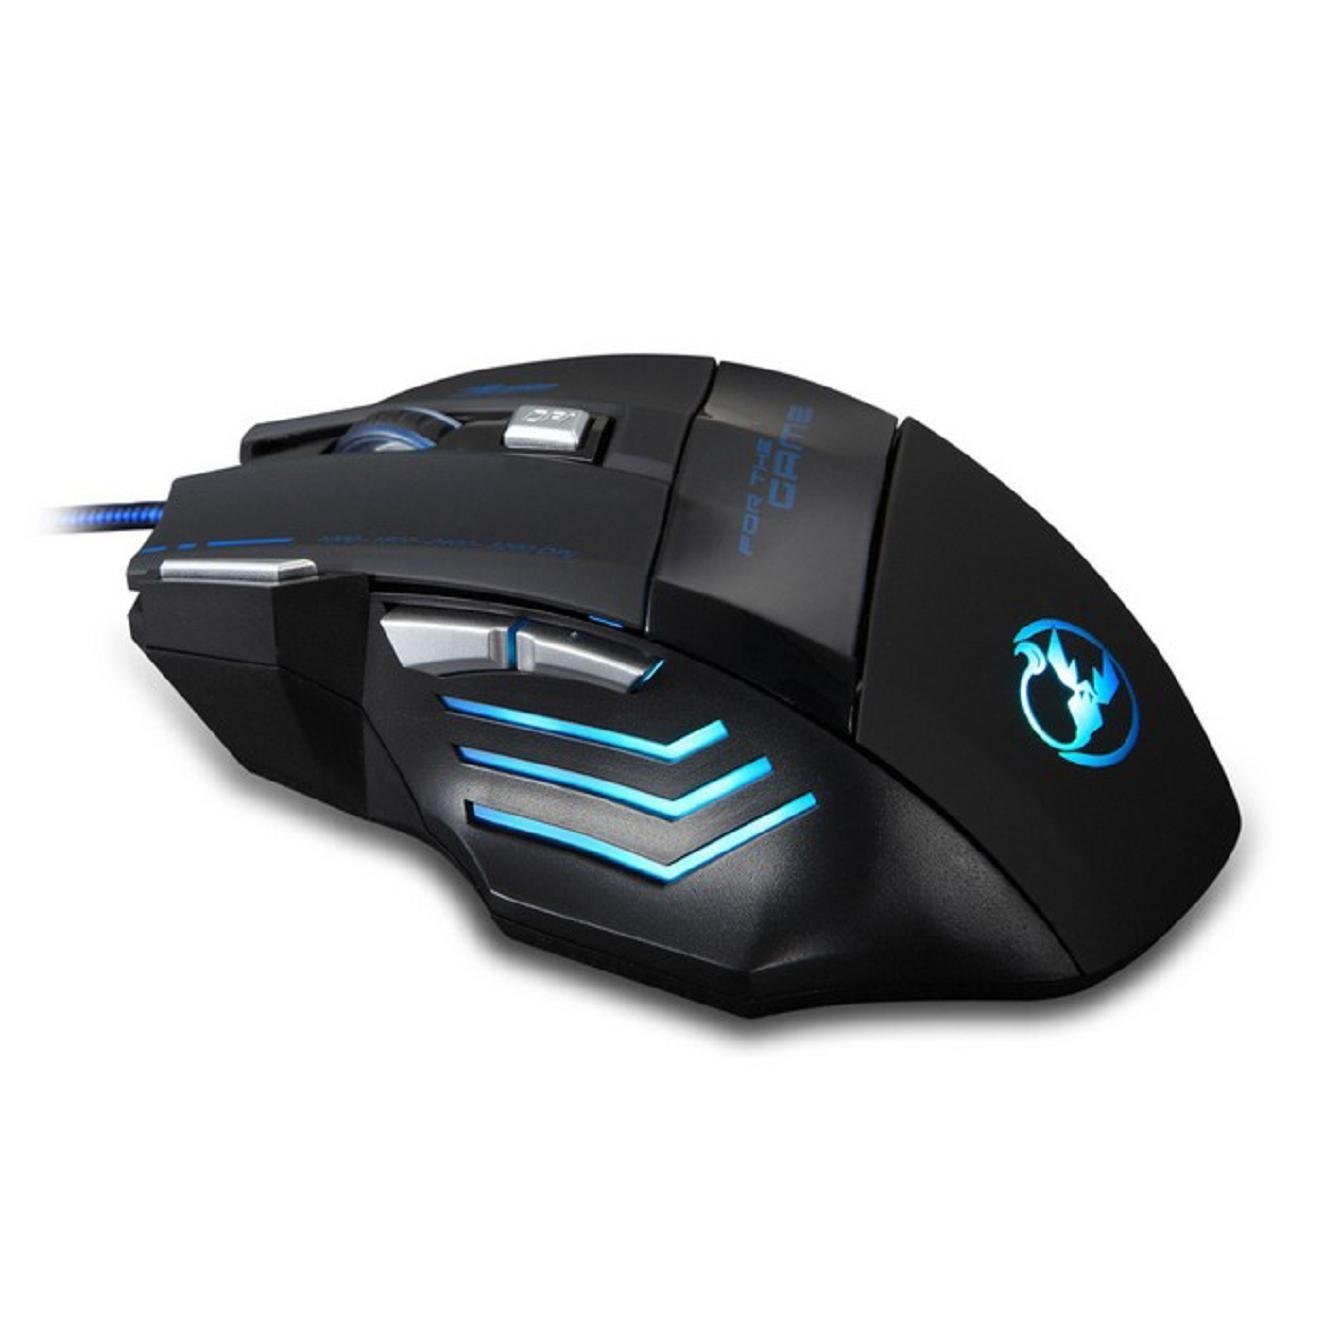 5500 DPI 7 Button LED Optical USB Wired Gaming Mouse Mice For Pro Gamer Trendy 